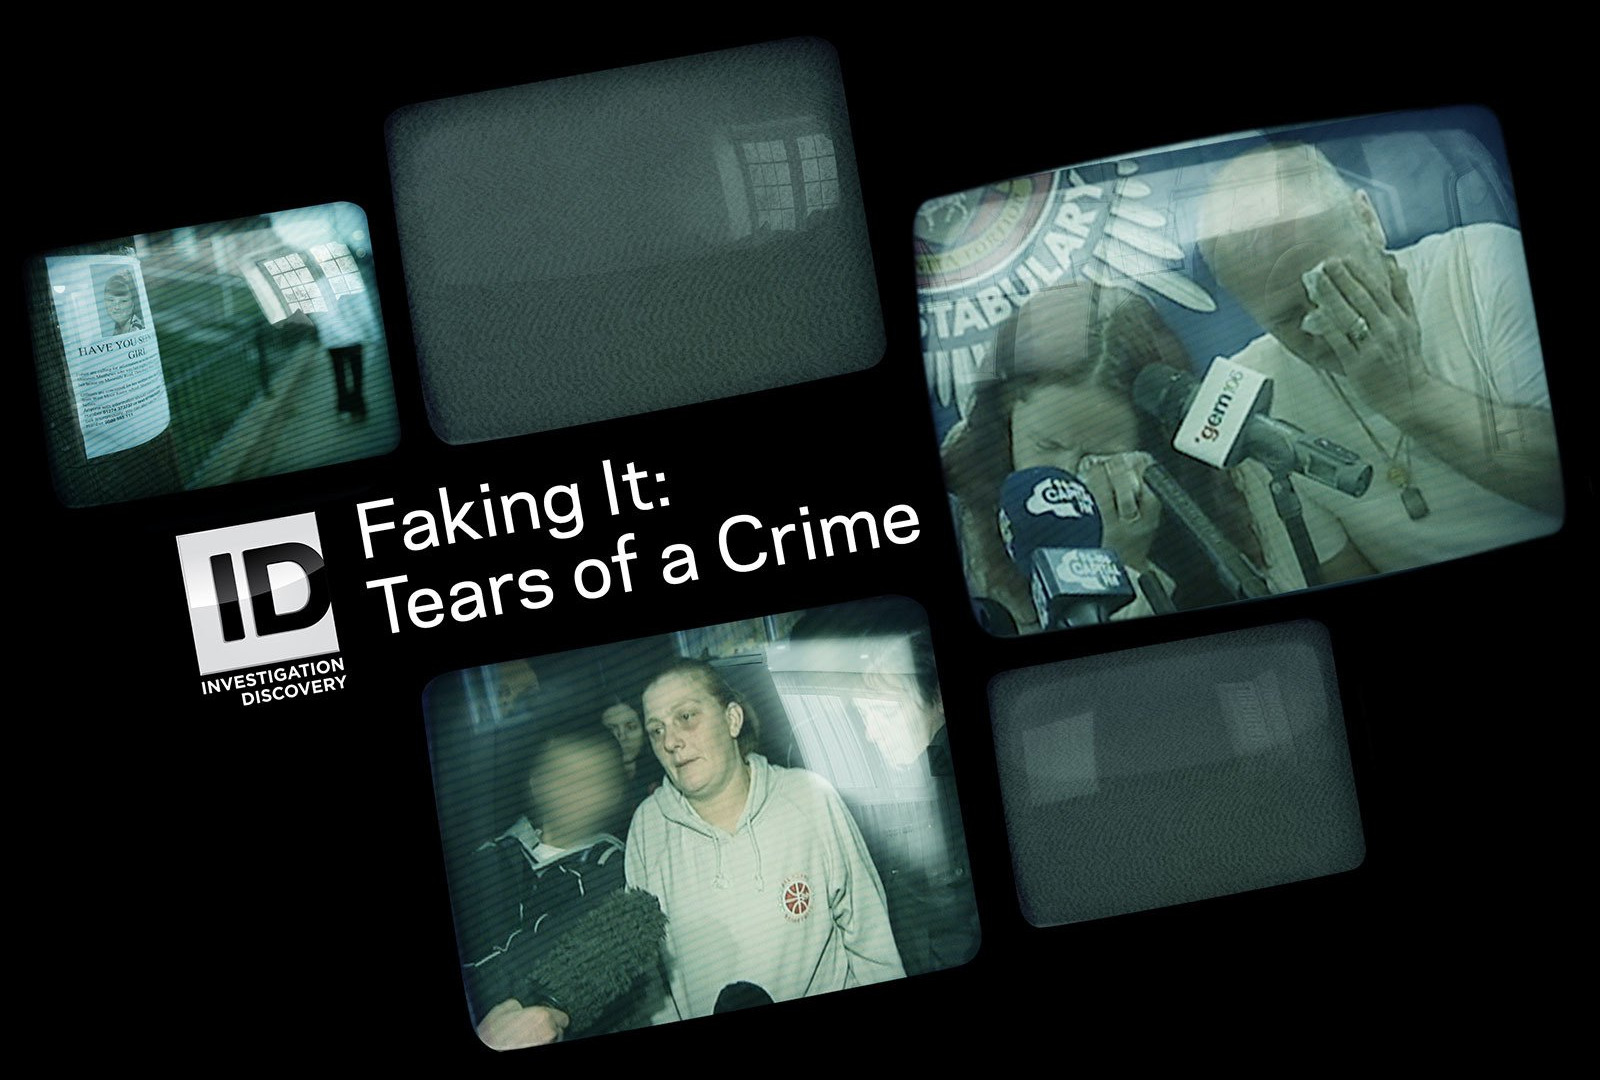 Show Faking It: Tears of a Crime